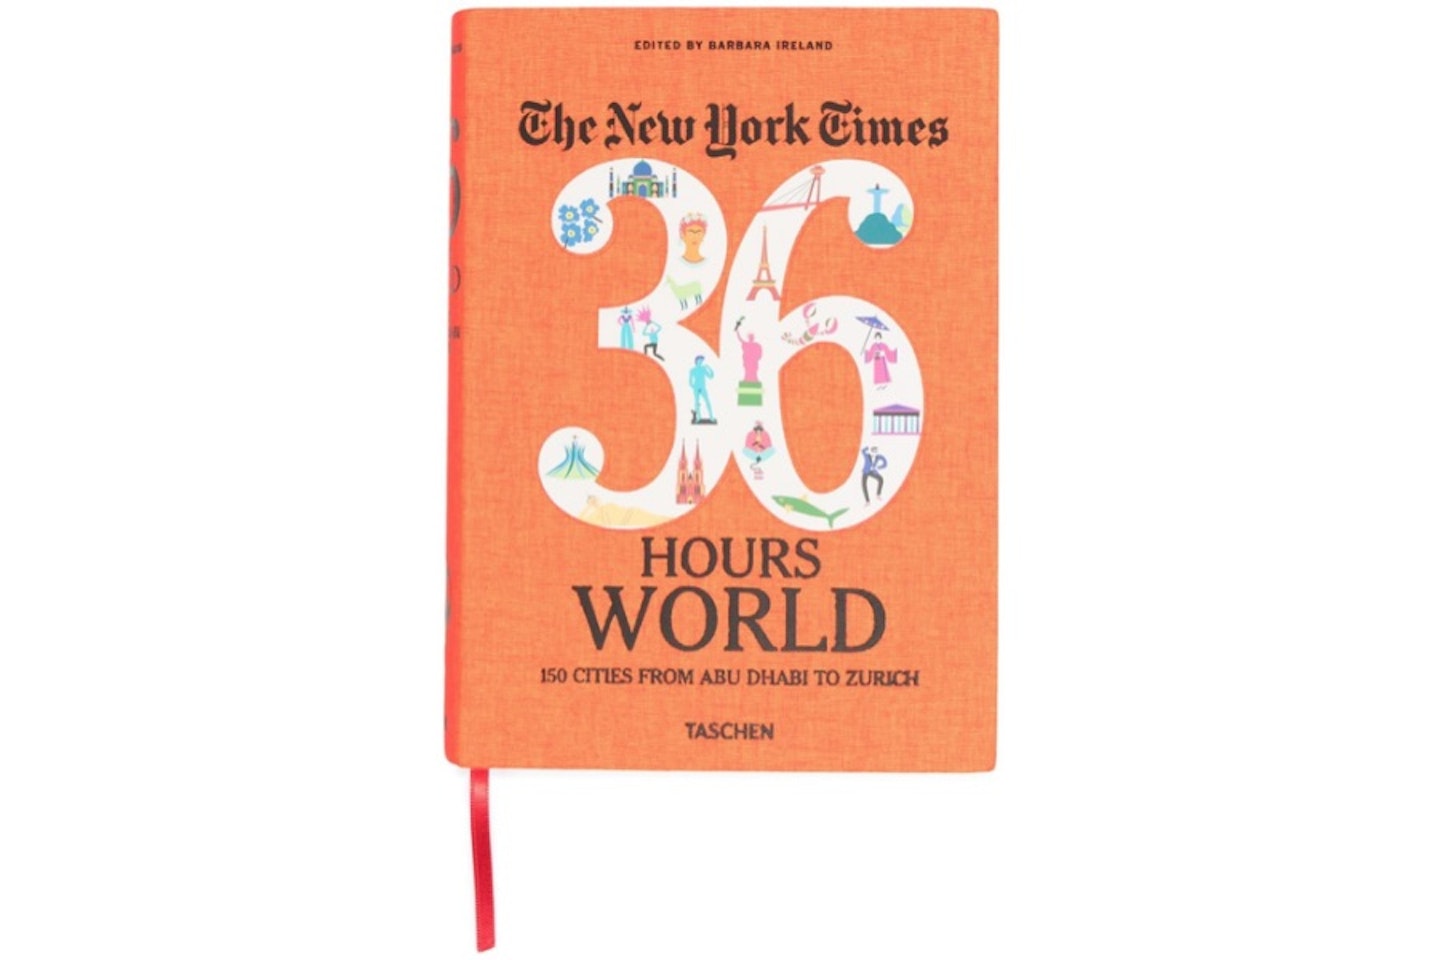 The New York Times 36 Hours: World